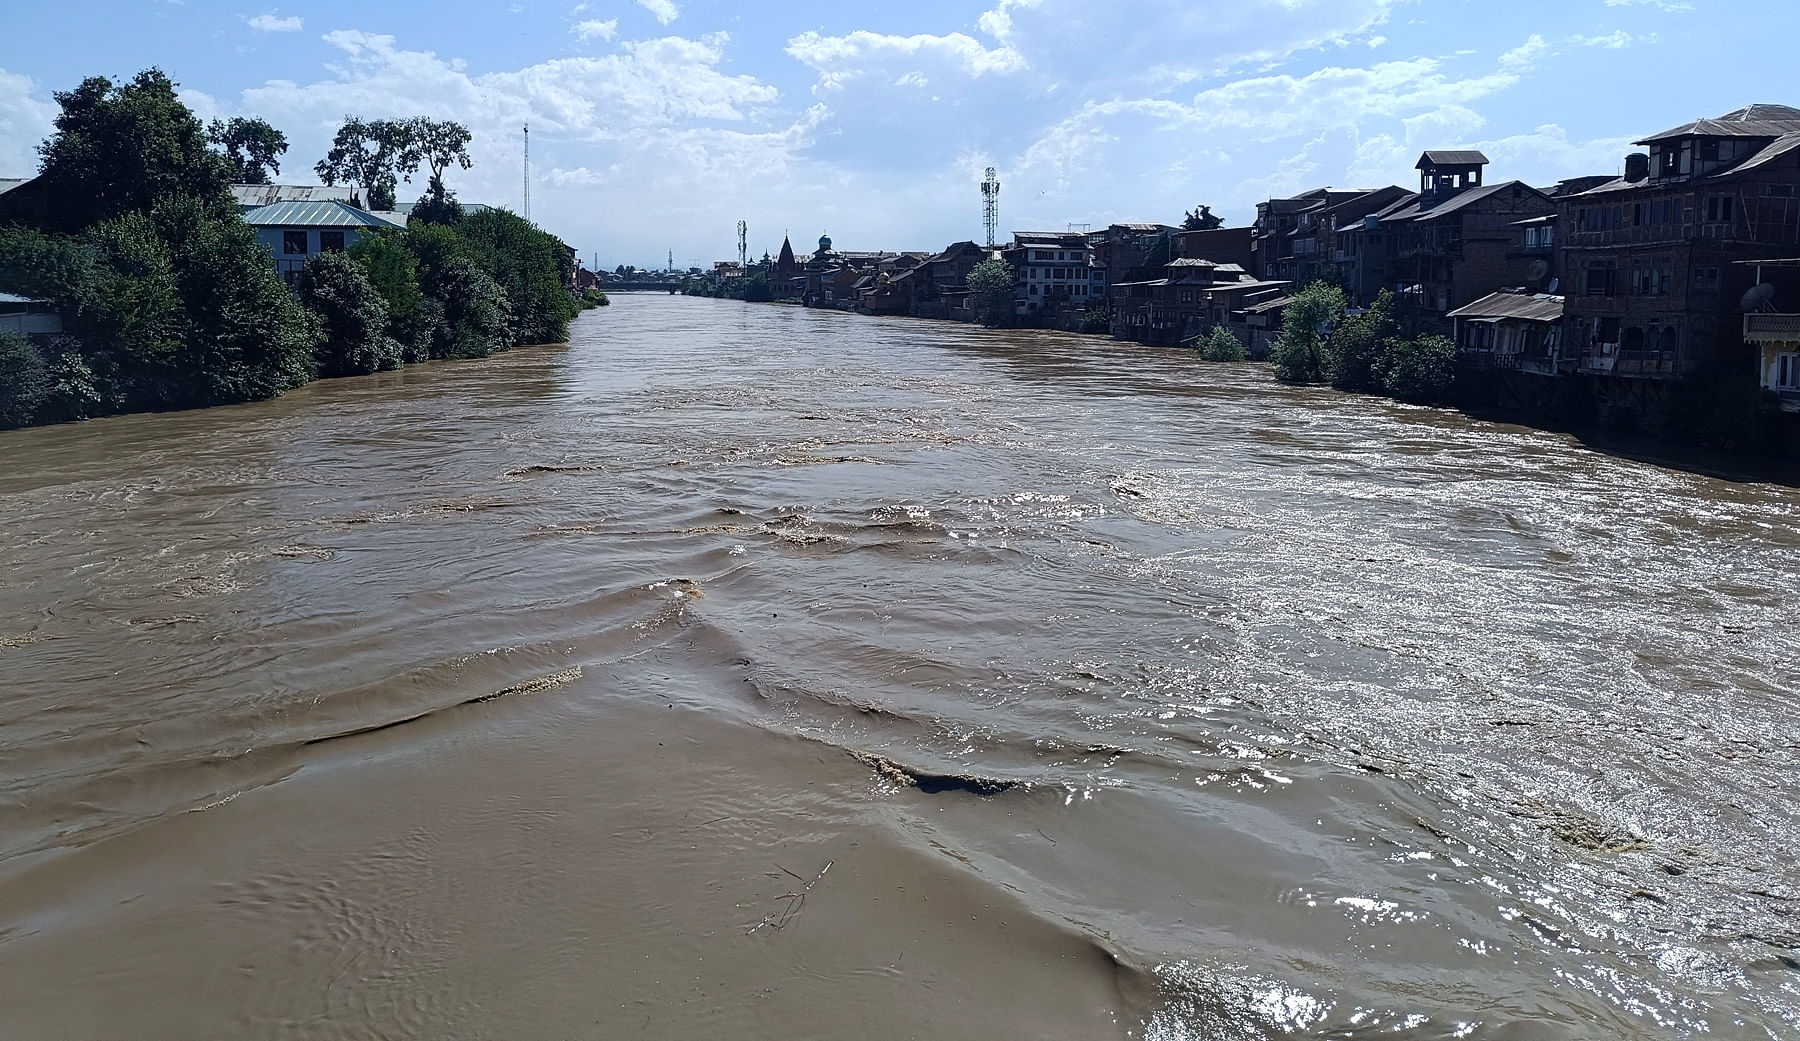 No flood threat as water level recedes in south Kashmir